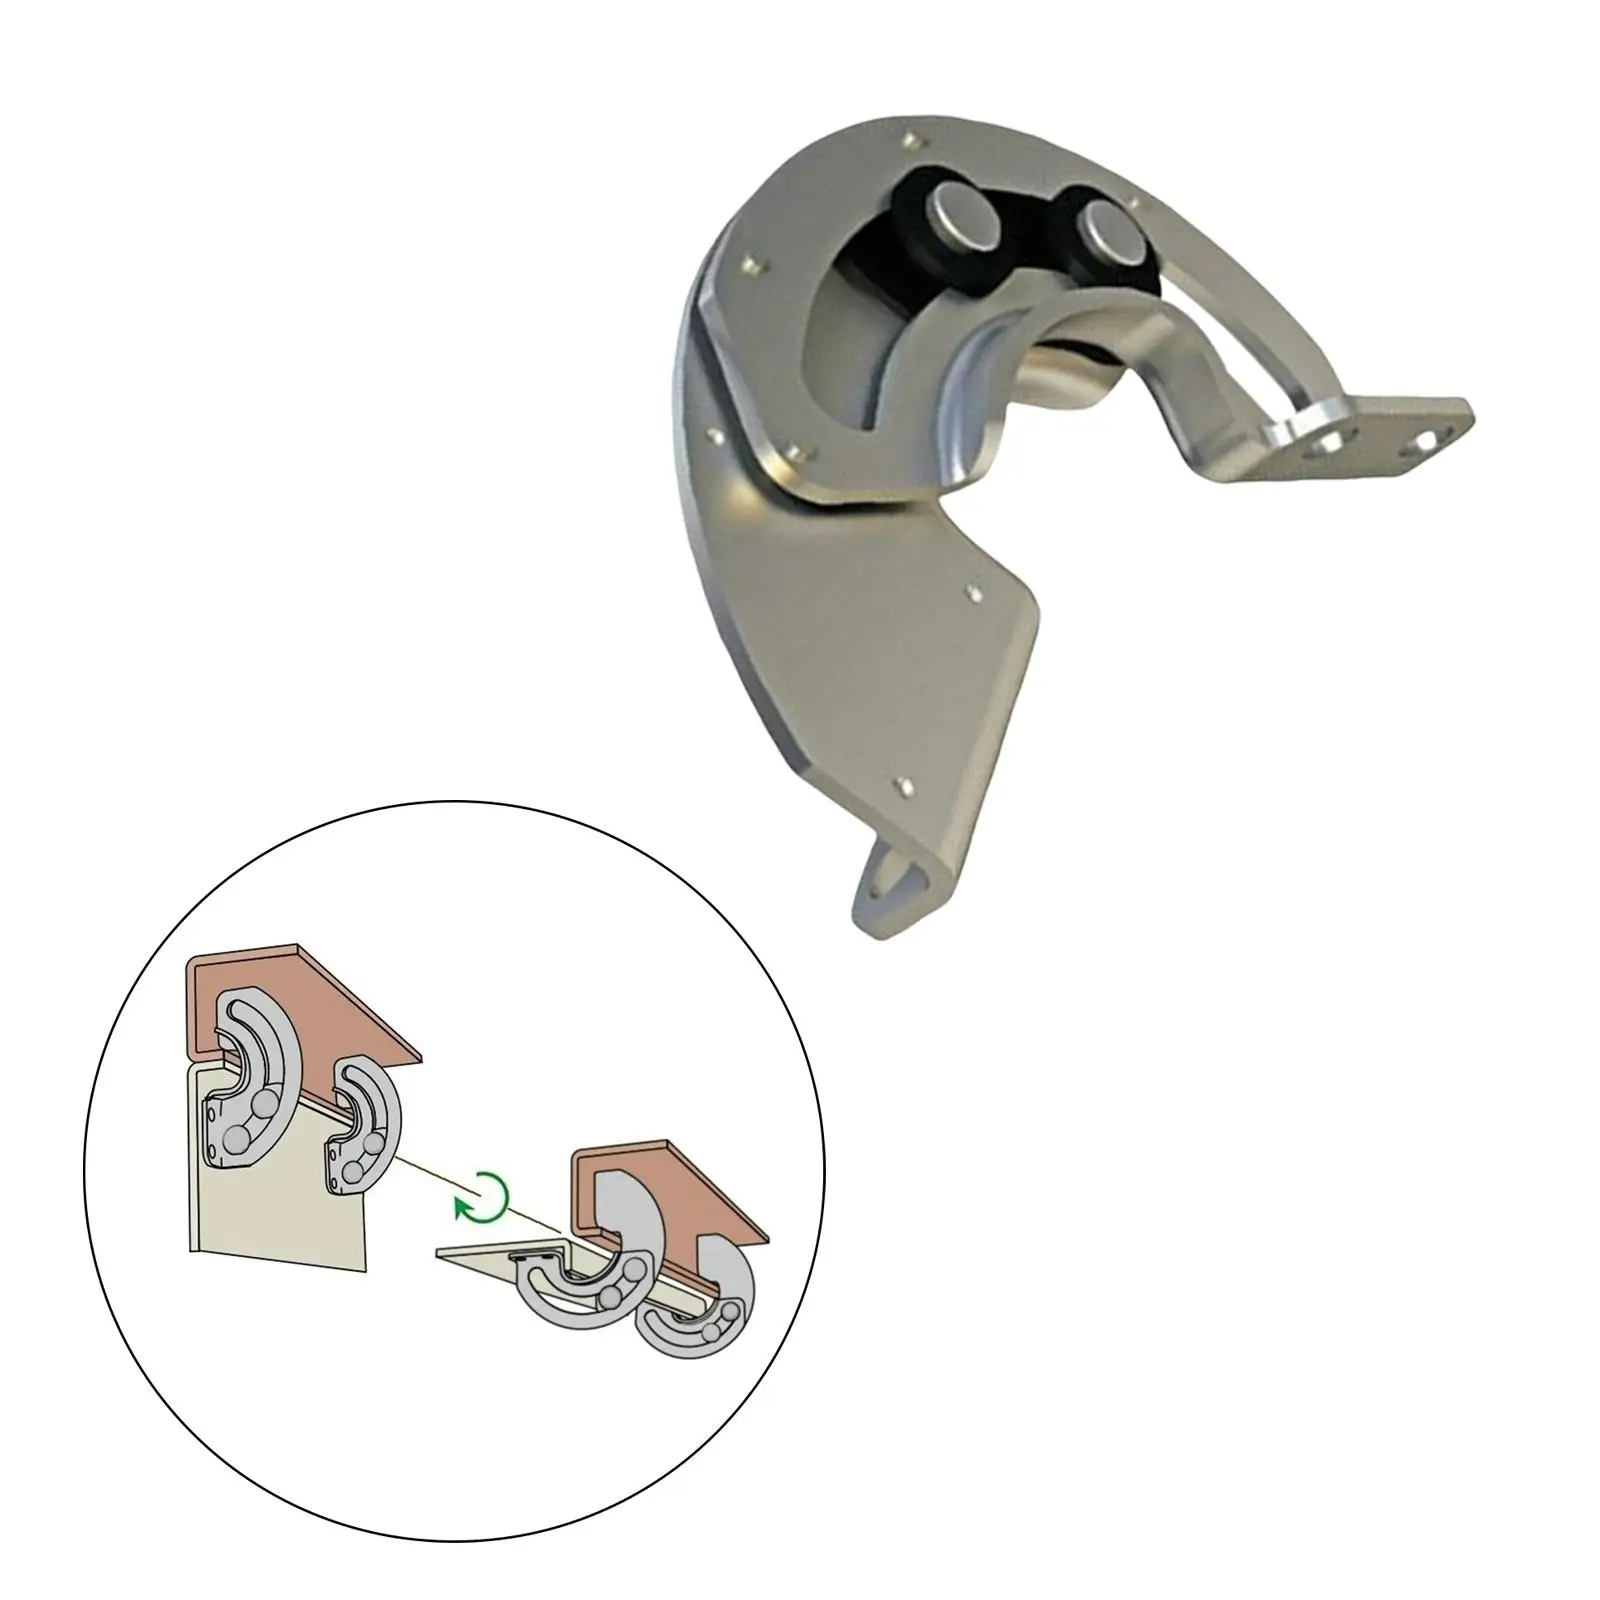 90 Degree Furniture Hardware Replaces Easy to Install Heavy Support Accessories Self Locking Hinge Home Kitchen Folding Hinges